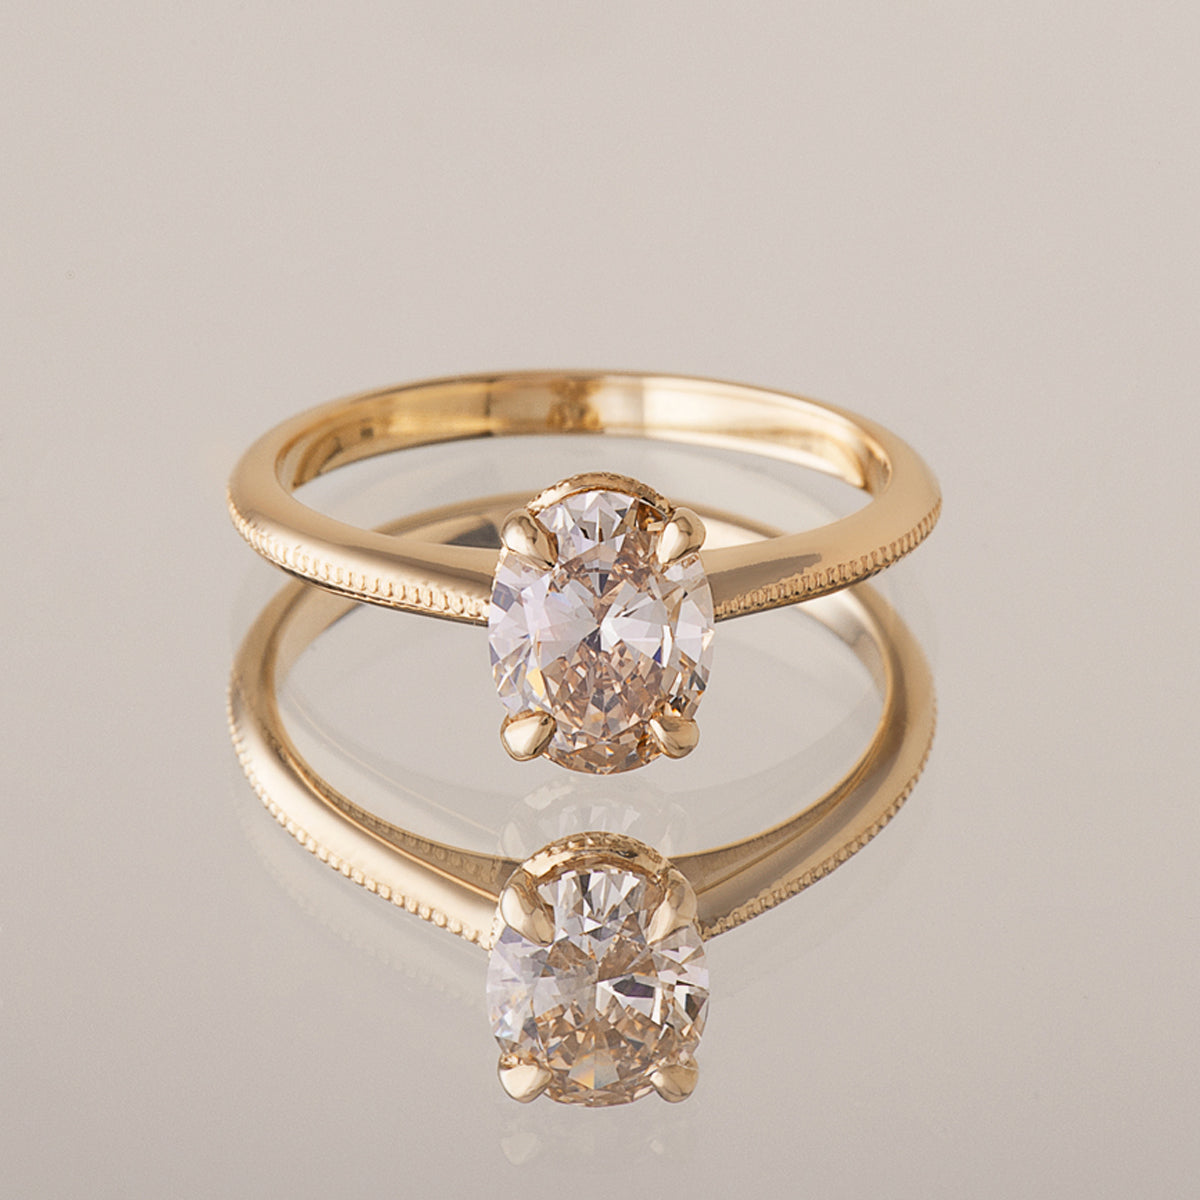 ATTIC Guide to Buying Engagement Rings Online